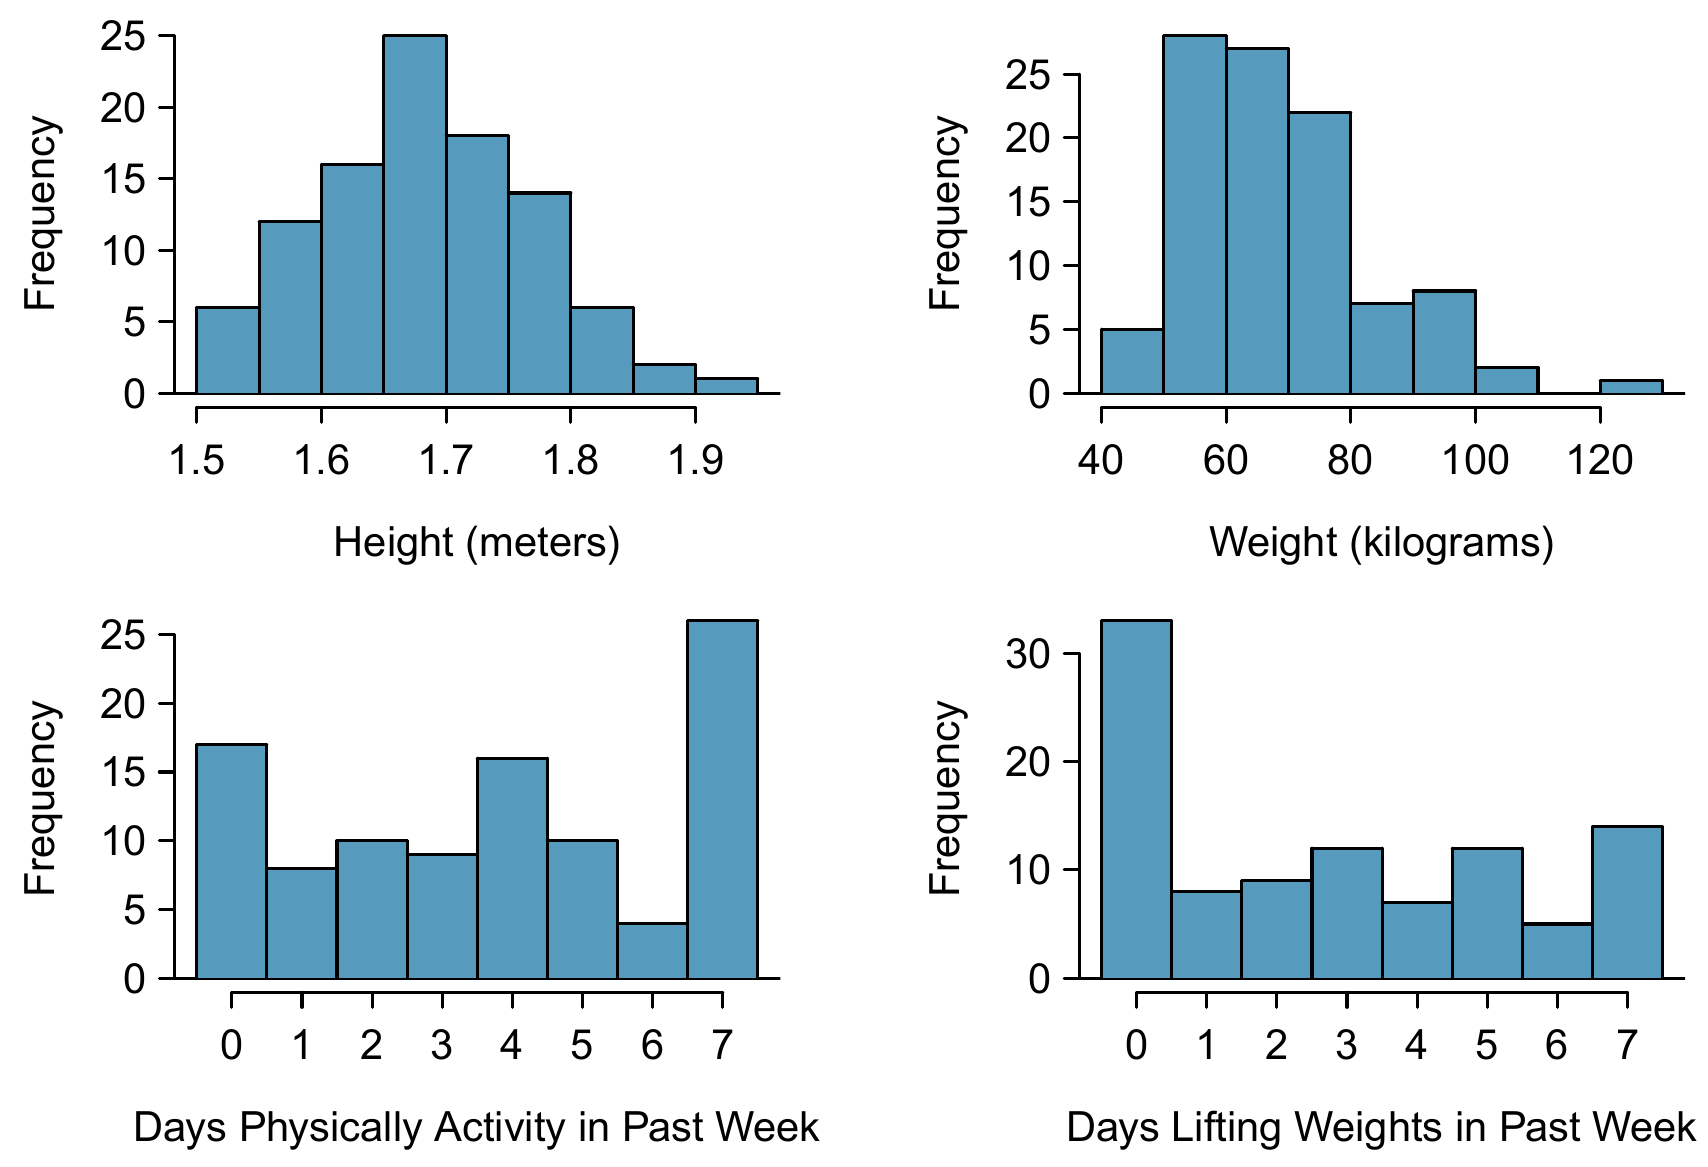 Histograms of \(\texttt{height}\), \(\texttt{weight}\), \(\texttt{activity}\), and \(\texttt{lifting}\) for the sample YRBSS data. The \(\texttt{height}\) distribution is approximately symmetric, \(\texttt{weight}\) is moderately skewed to the right, \(\texttt{activity}\) is bimodal or multimodal (with unclear skew), and \(\texttt{lifting}\) is strongly right skewed.